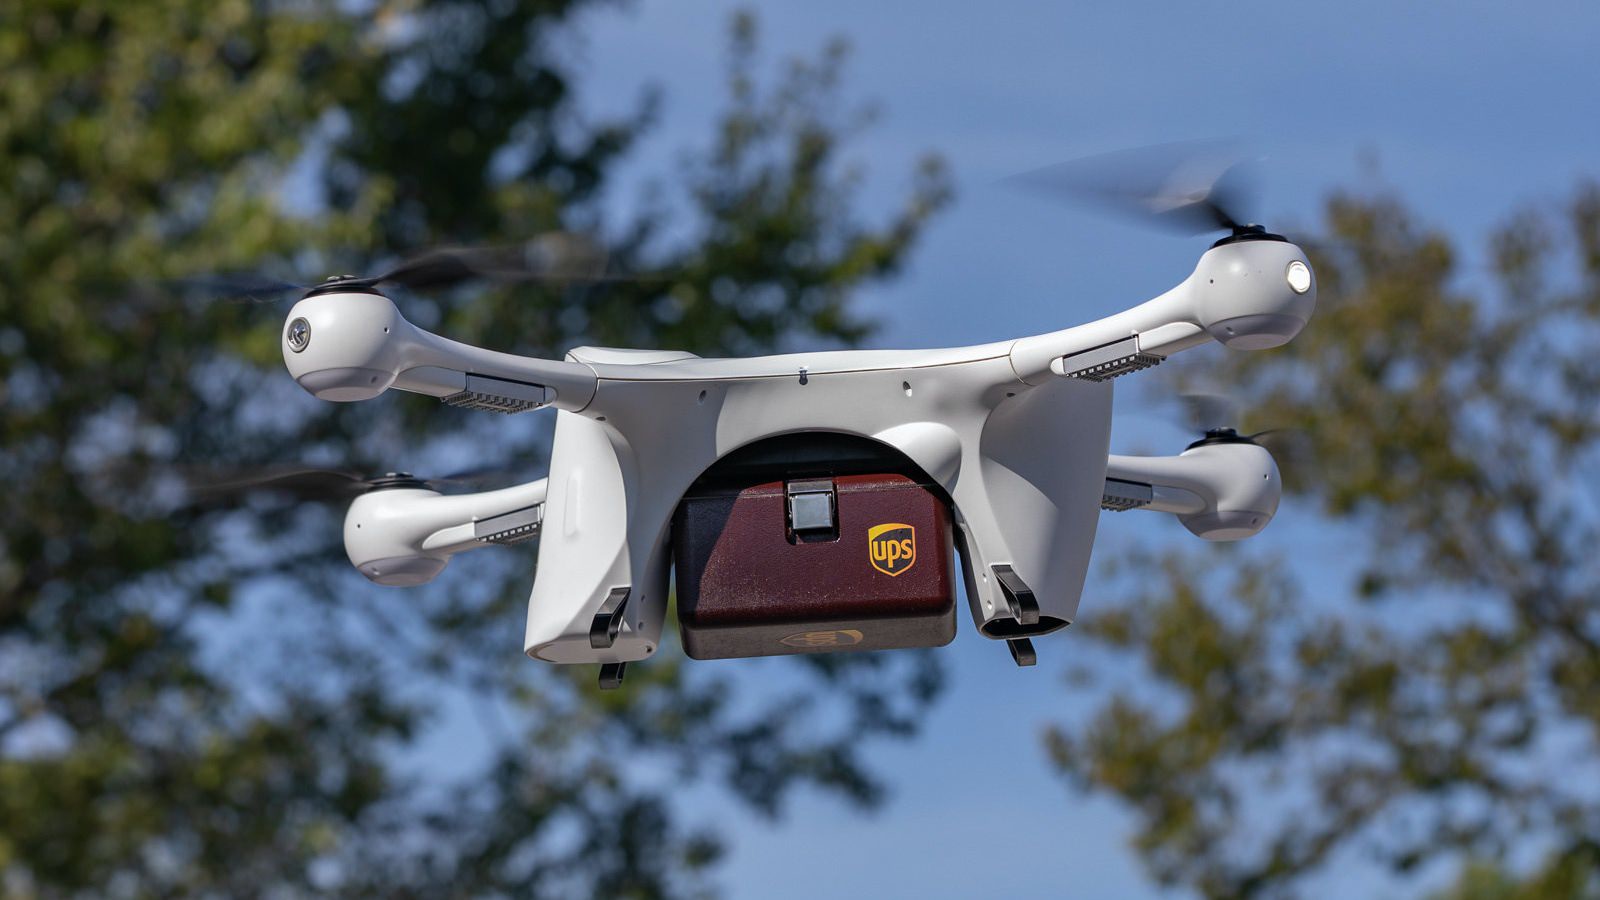 UPS-and-CVS-partner-to-deliver-prescriptions-by-drone.jpg